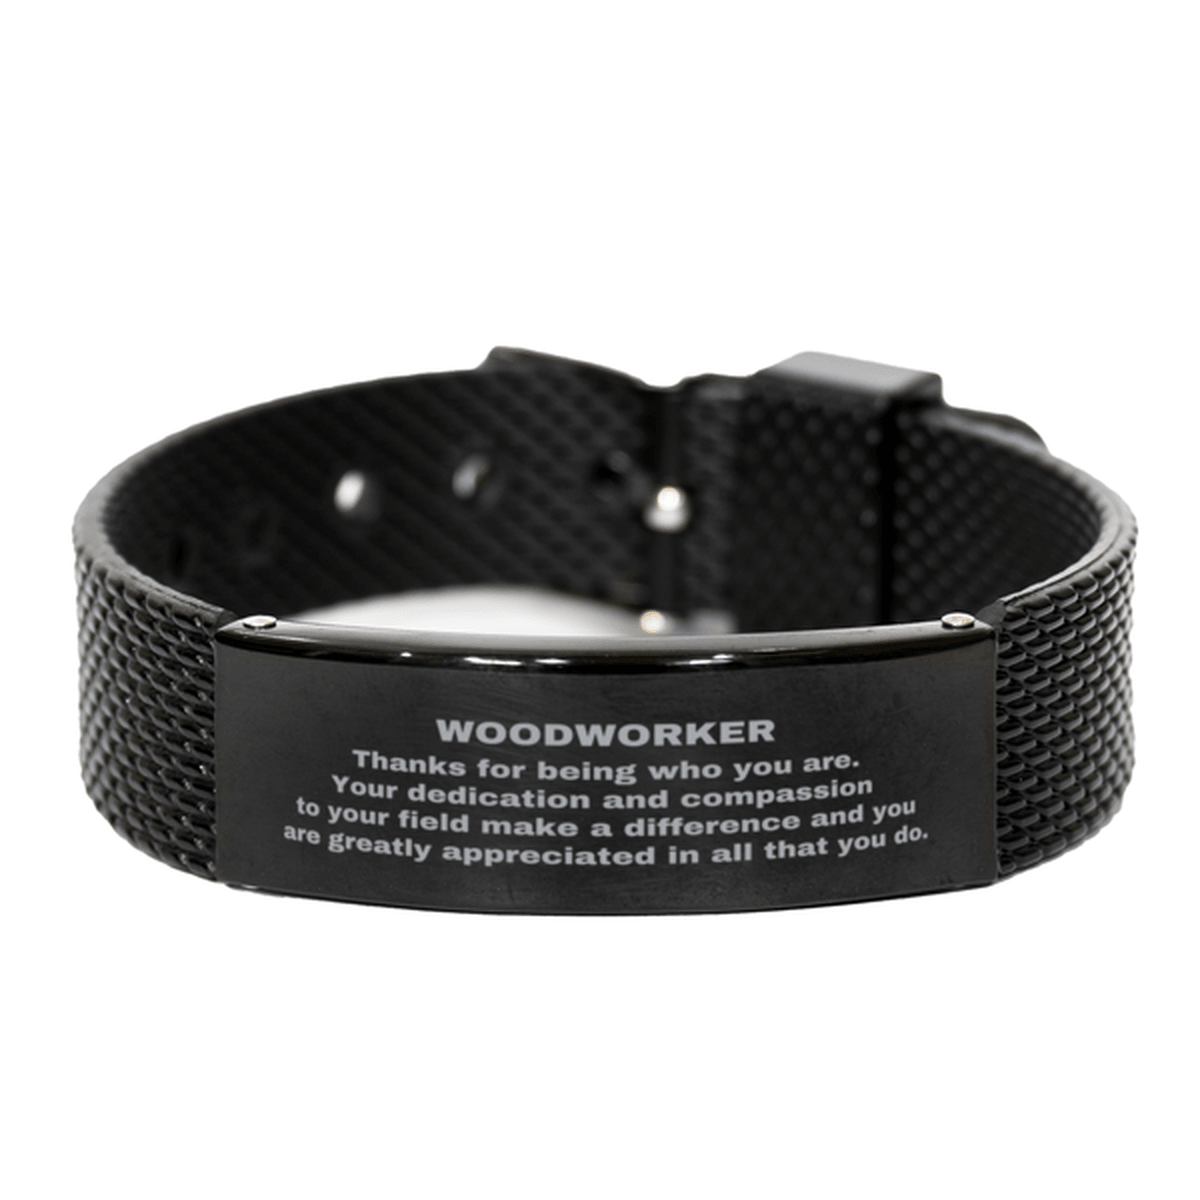 Woodworker Black Shark Mesh Stainless Steel Engraved Bracelet - Thanks for being who you are - Birthday Christmas Jewelry Gifts Coworkers Colleague Boss - Mallard Moon Gift Shop